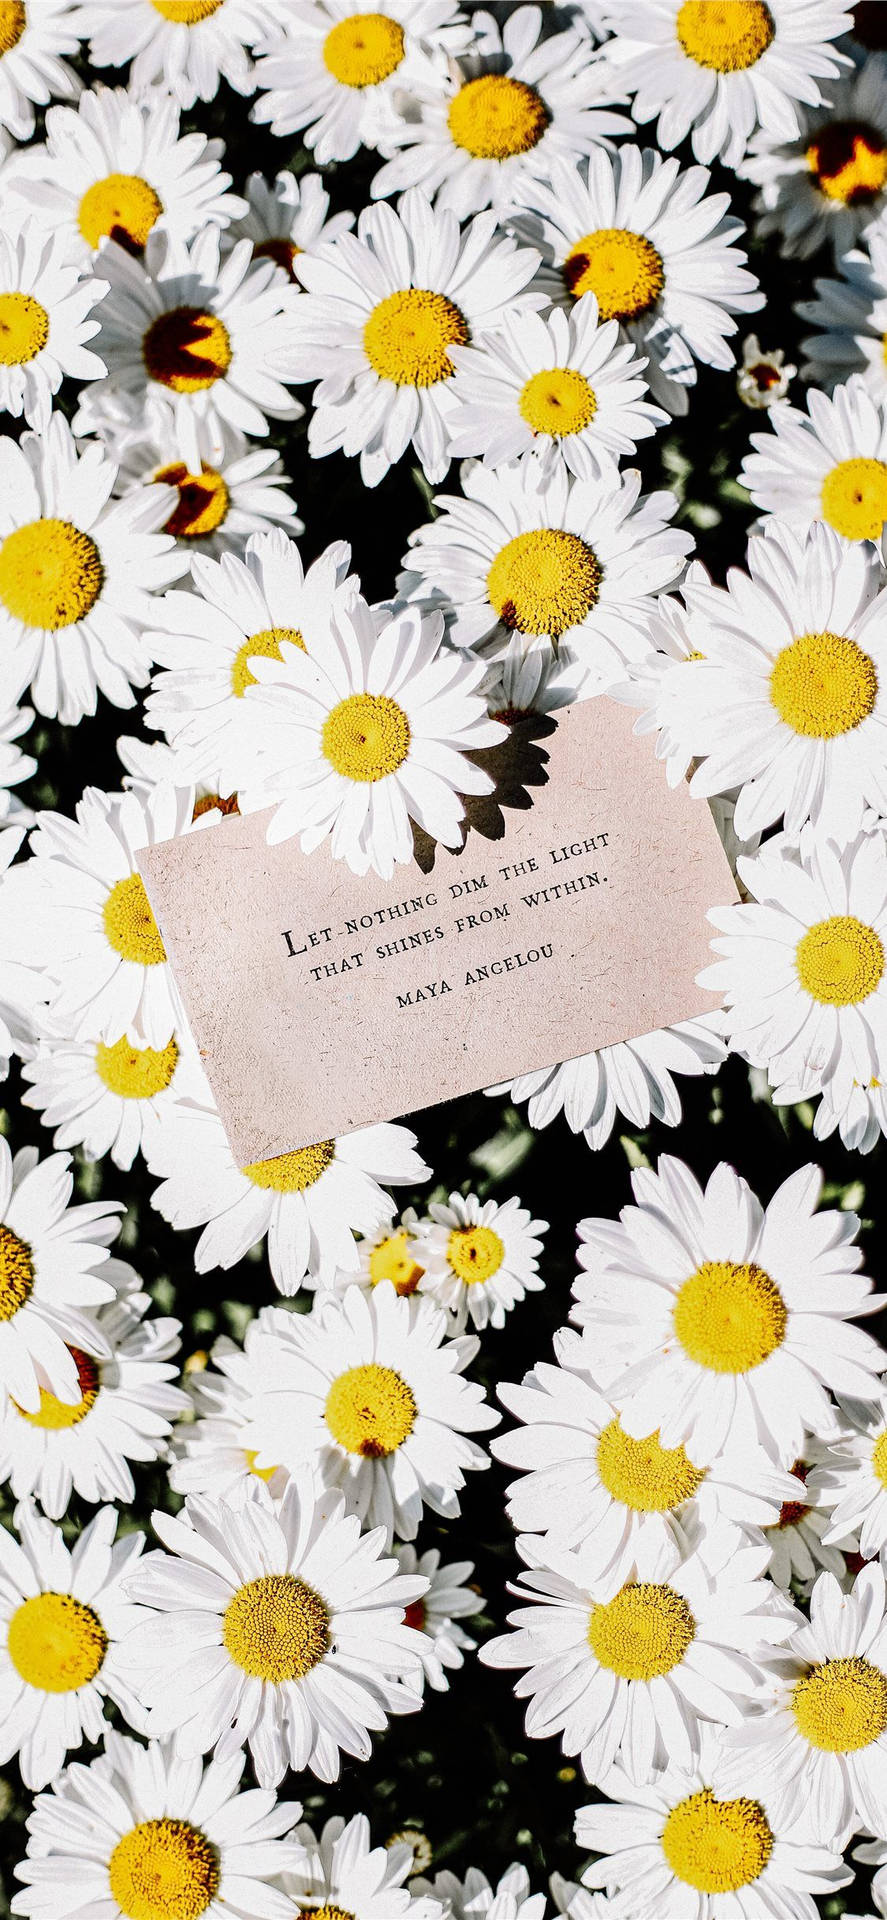 Maya Angelou Quote And Daisy Iphone